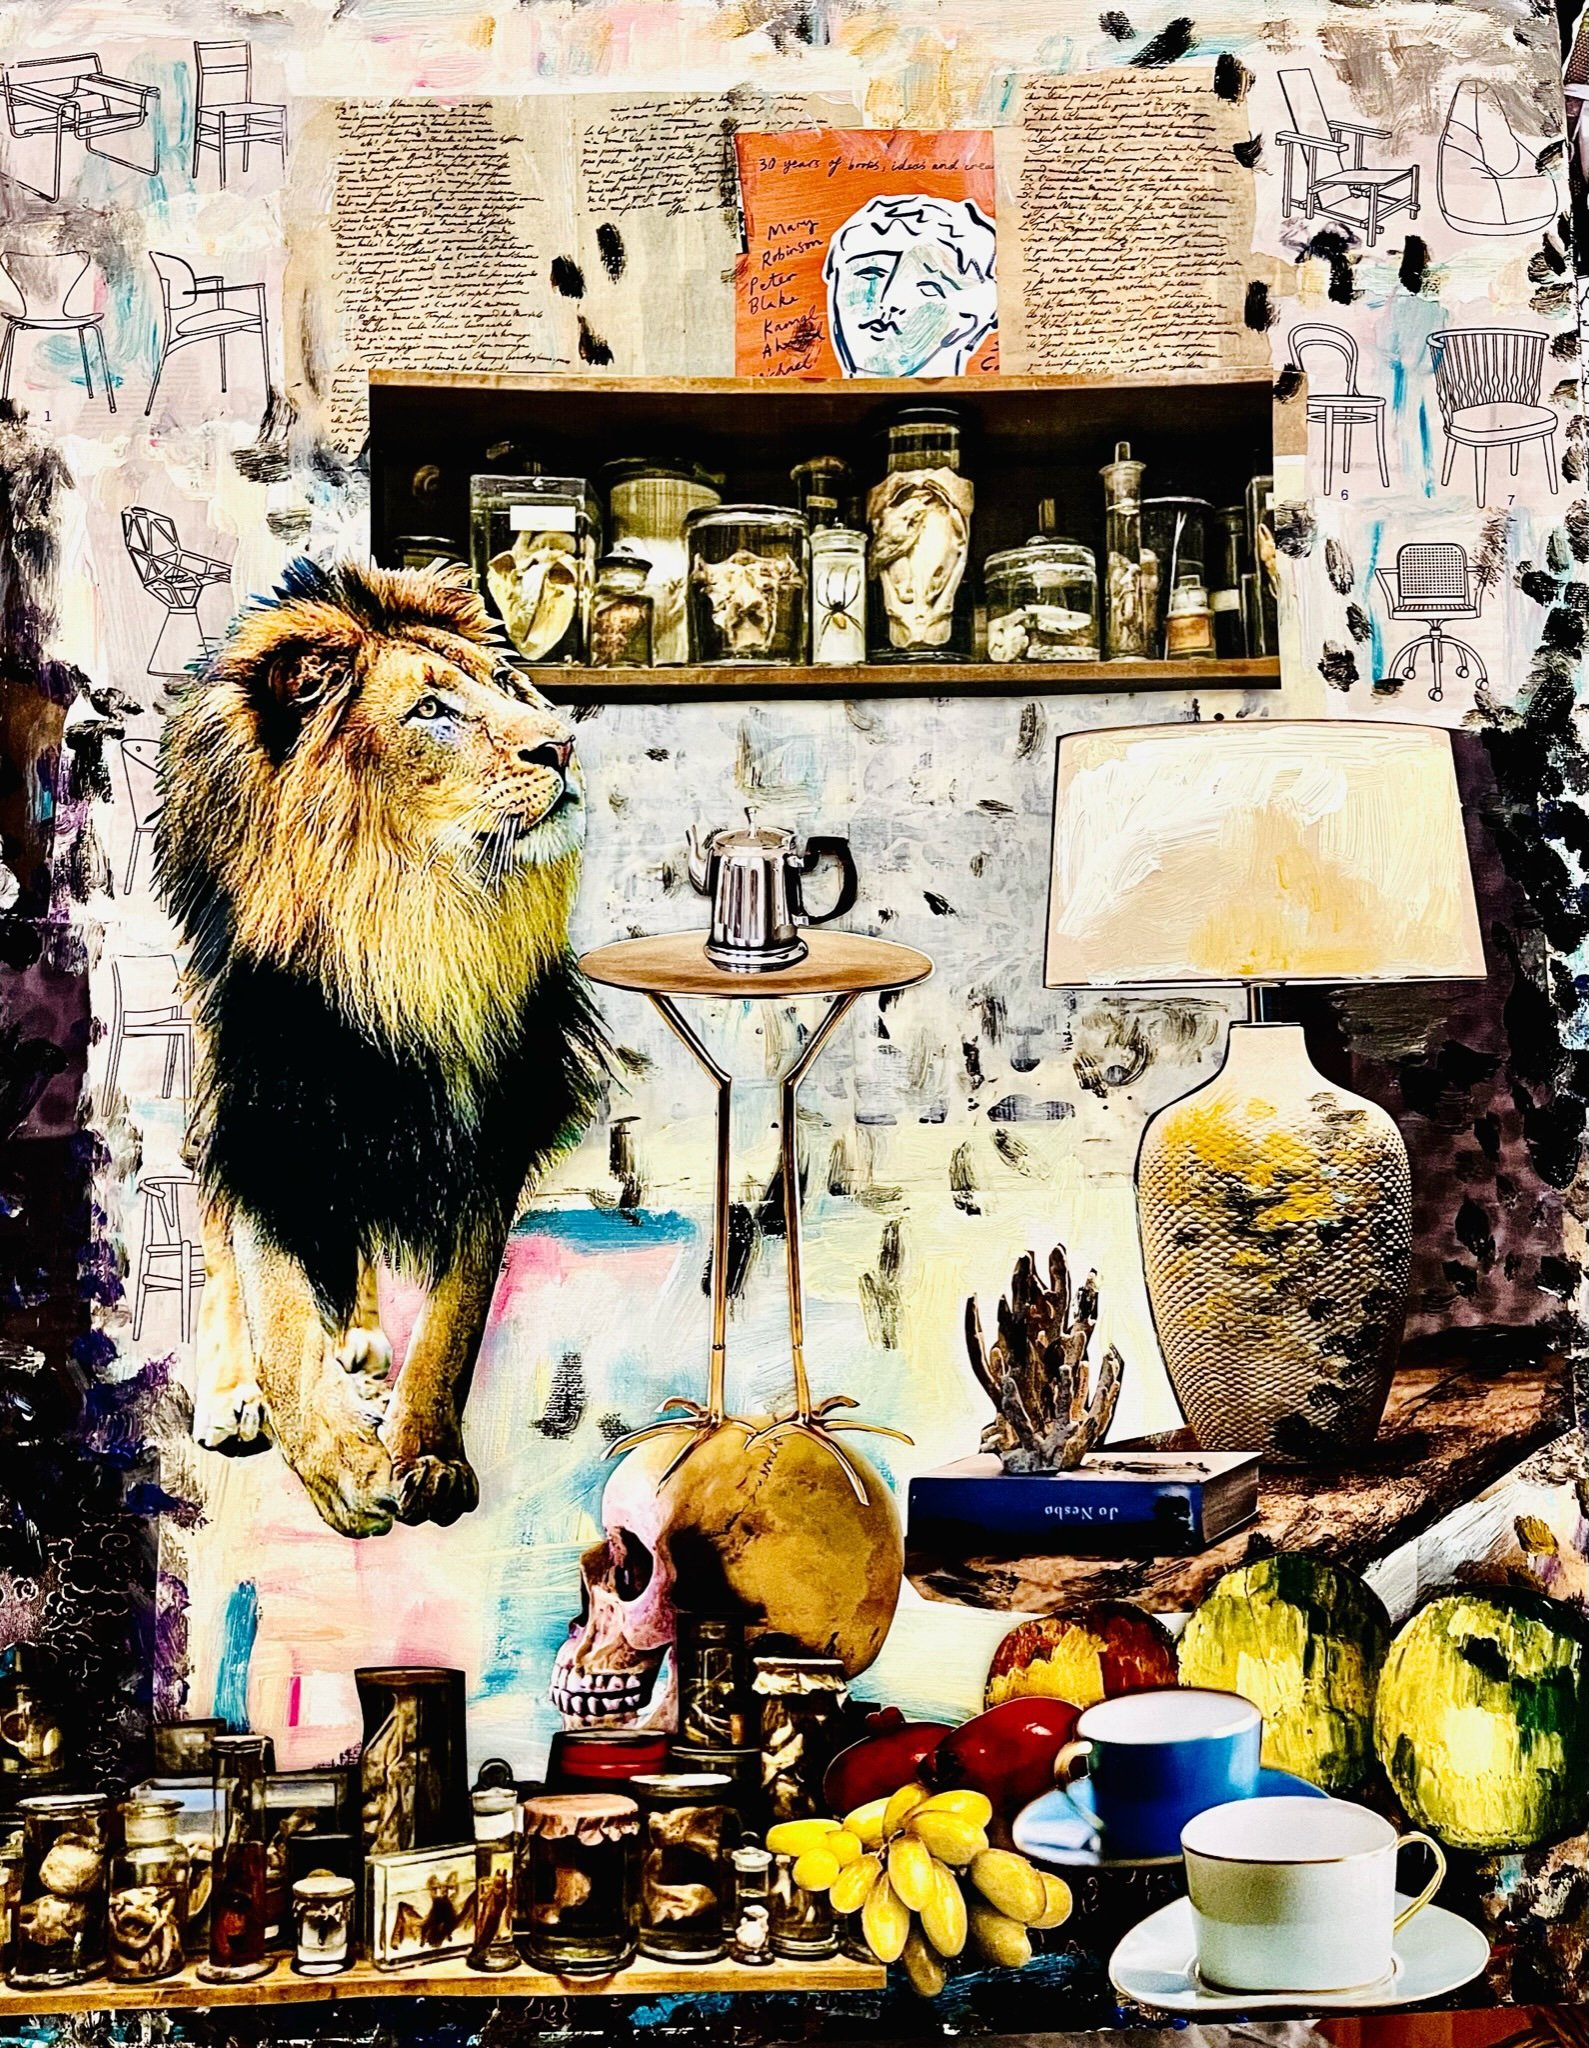 Lions Death on Cassini coffee table 90x60 Hahnenmühle print on paper framed €900.JPG